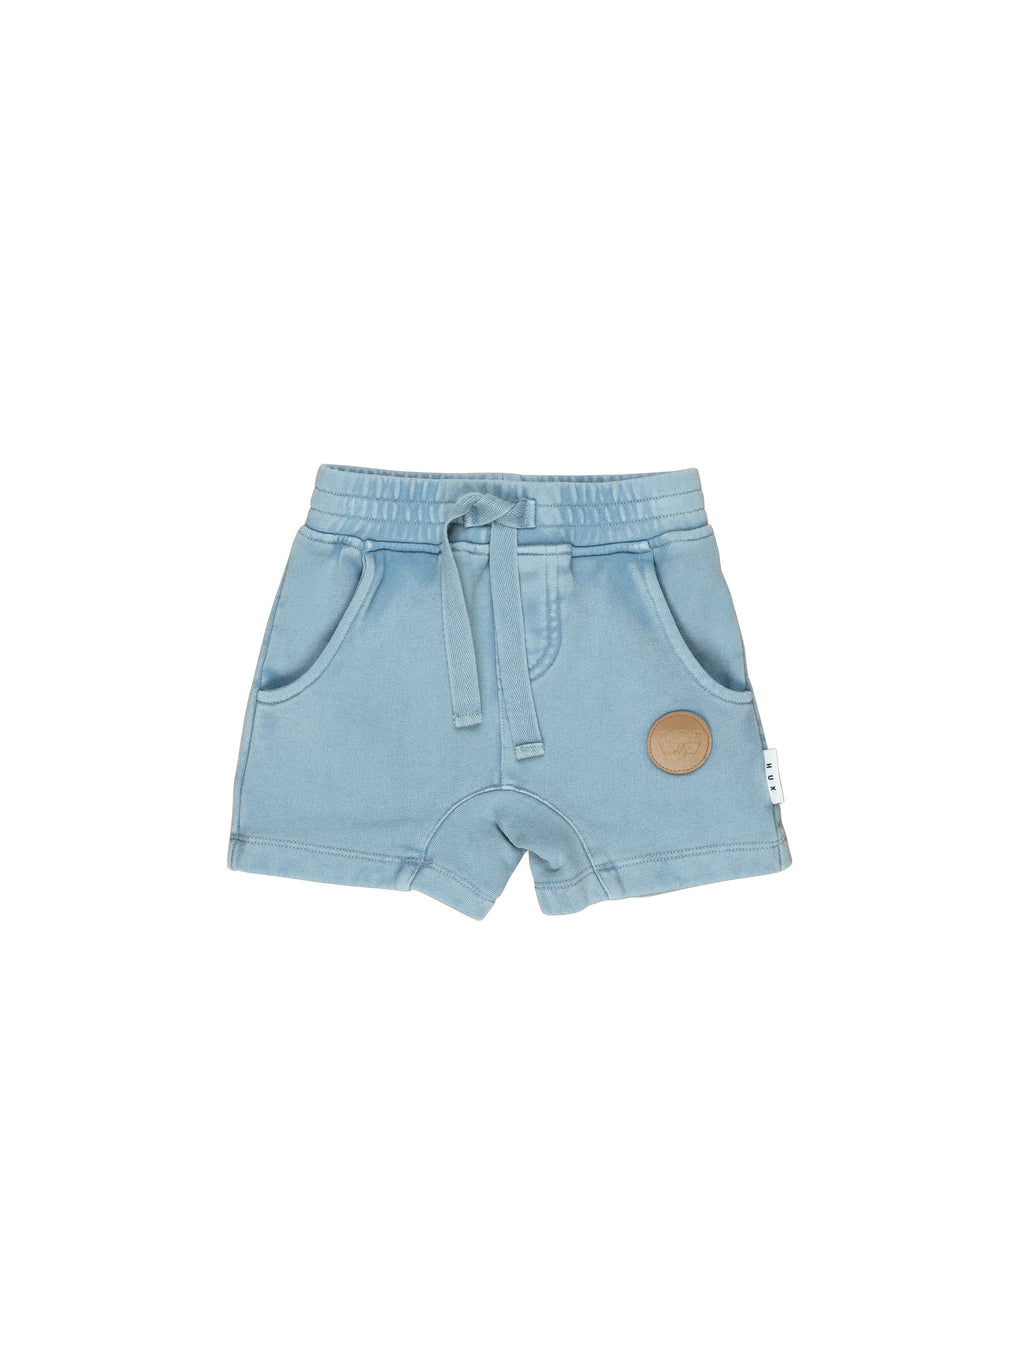 Huxbaby Vintage Terry Slouch Short - Vintage Dusty Blue